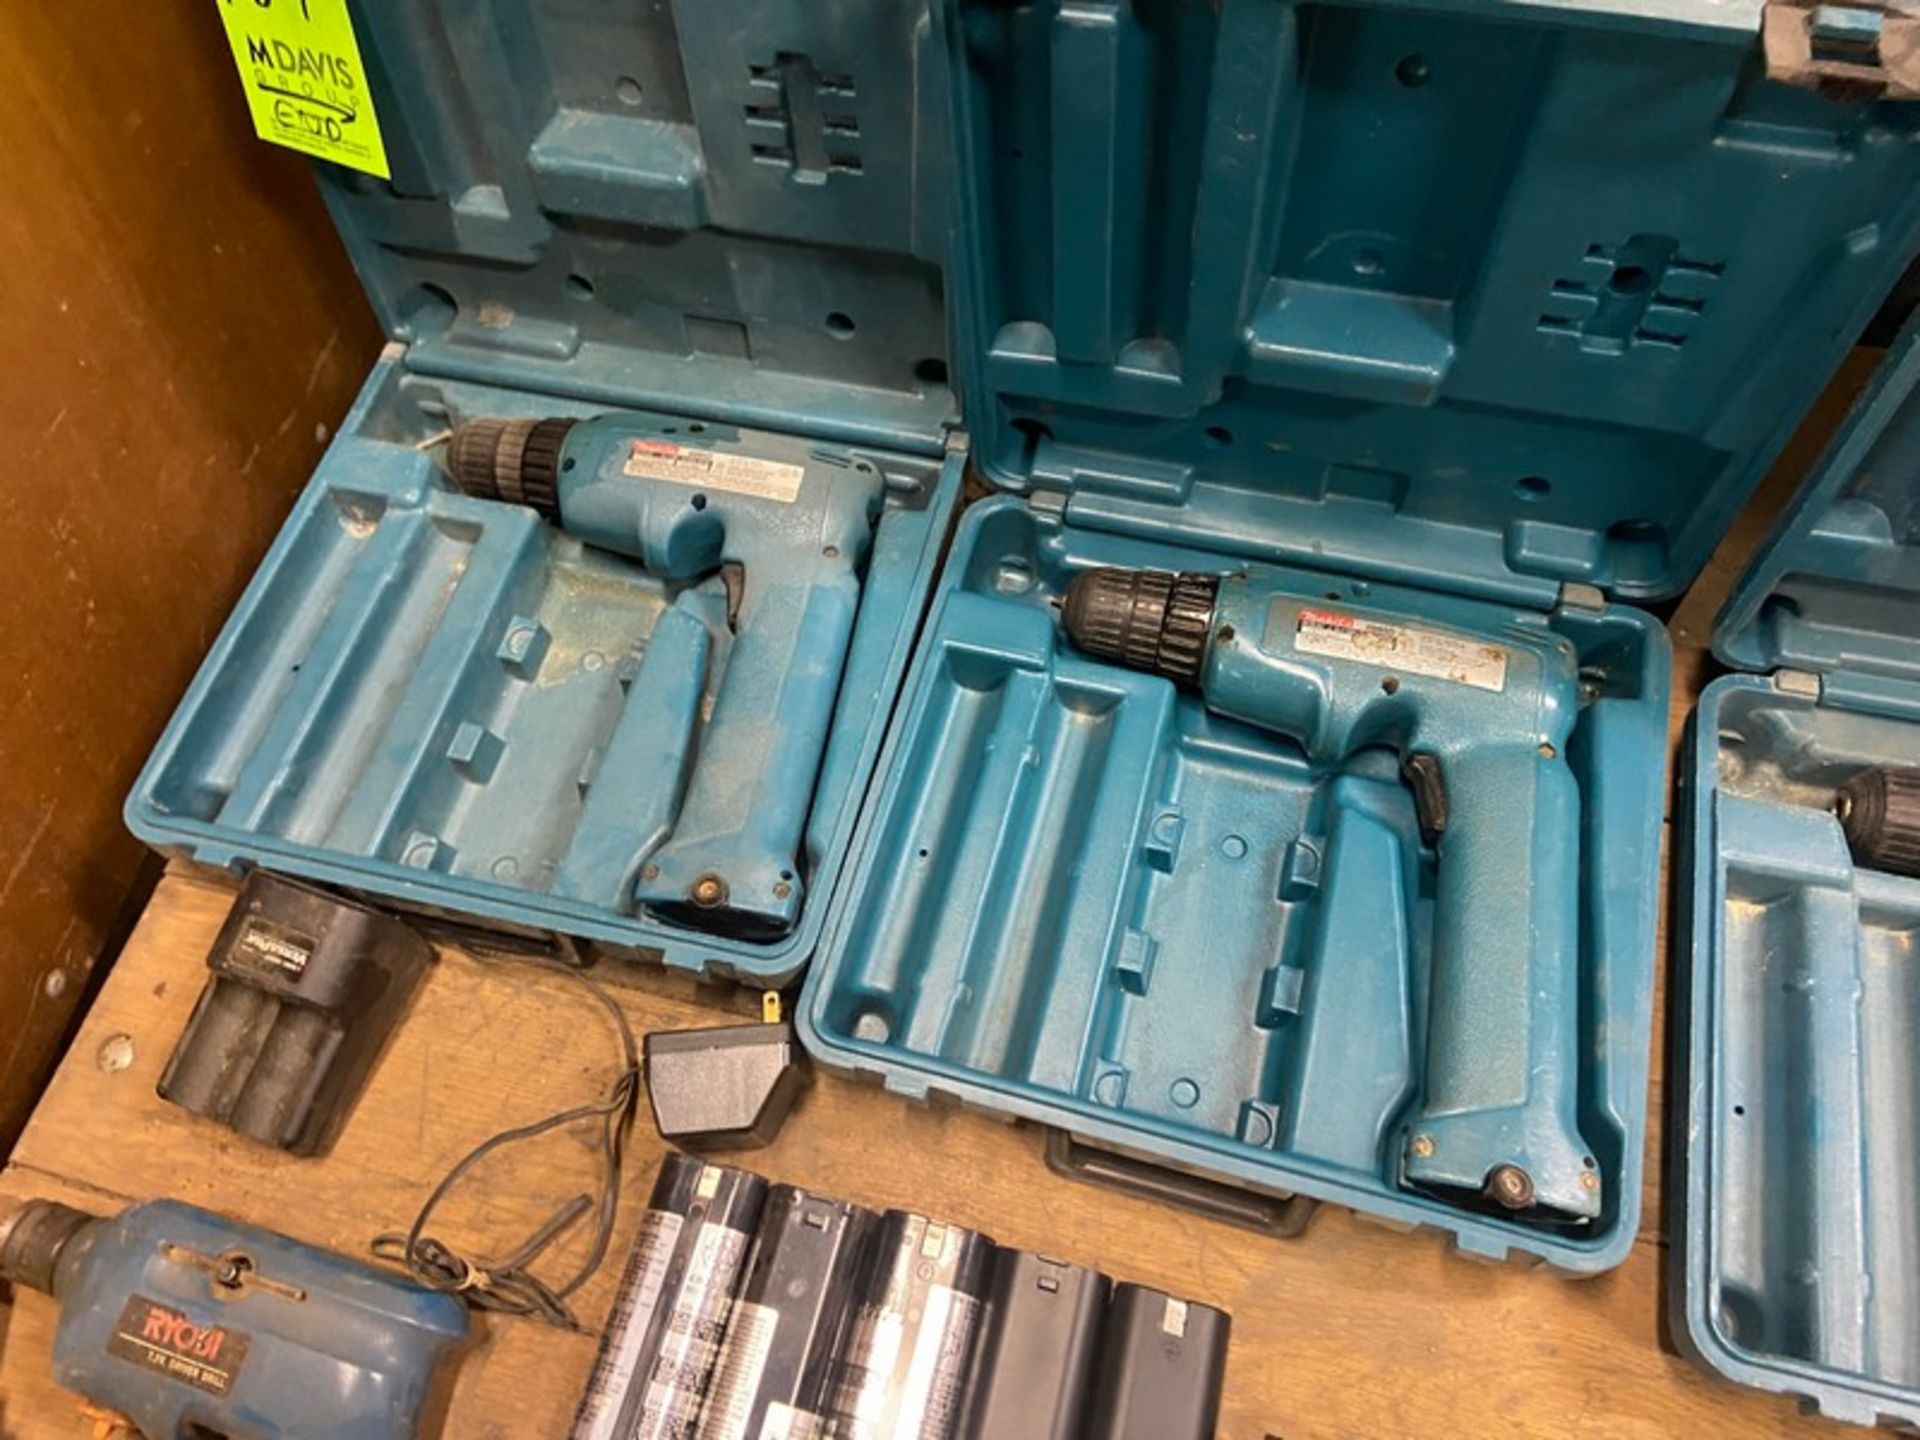 Lot of Assorted Makita Drills with Hard Cases, with Batteries & Chargers (LOCATED IN PITTSBURGH, PA) - Image 8 of 10